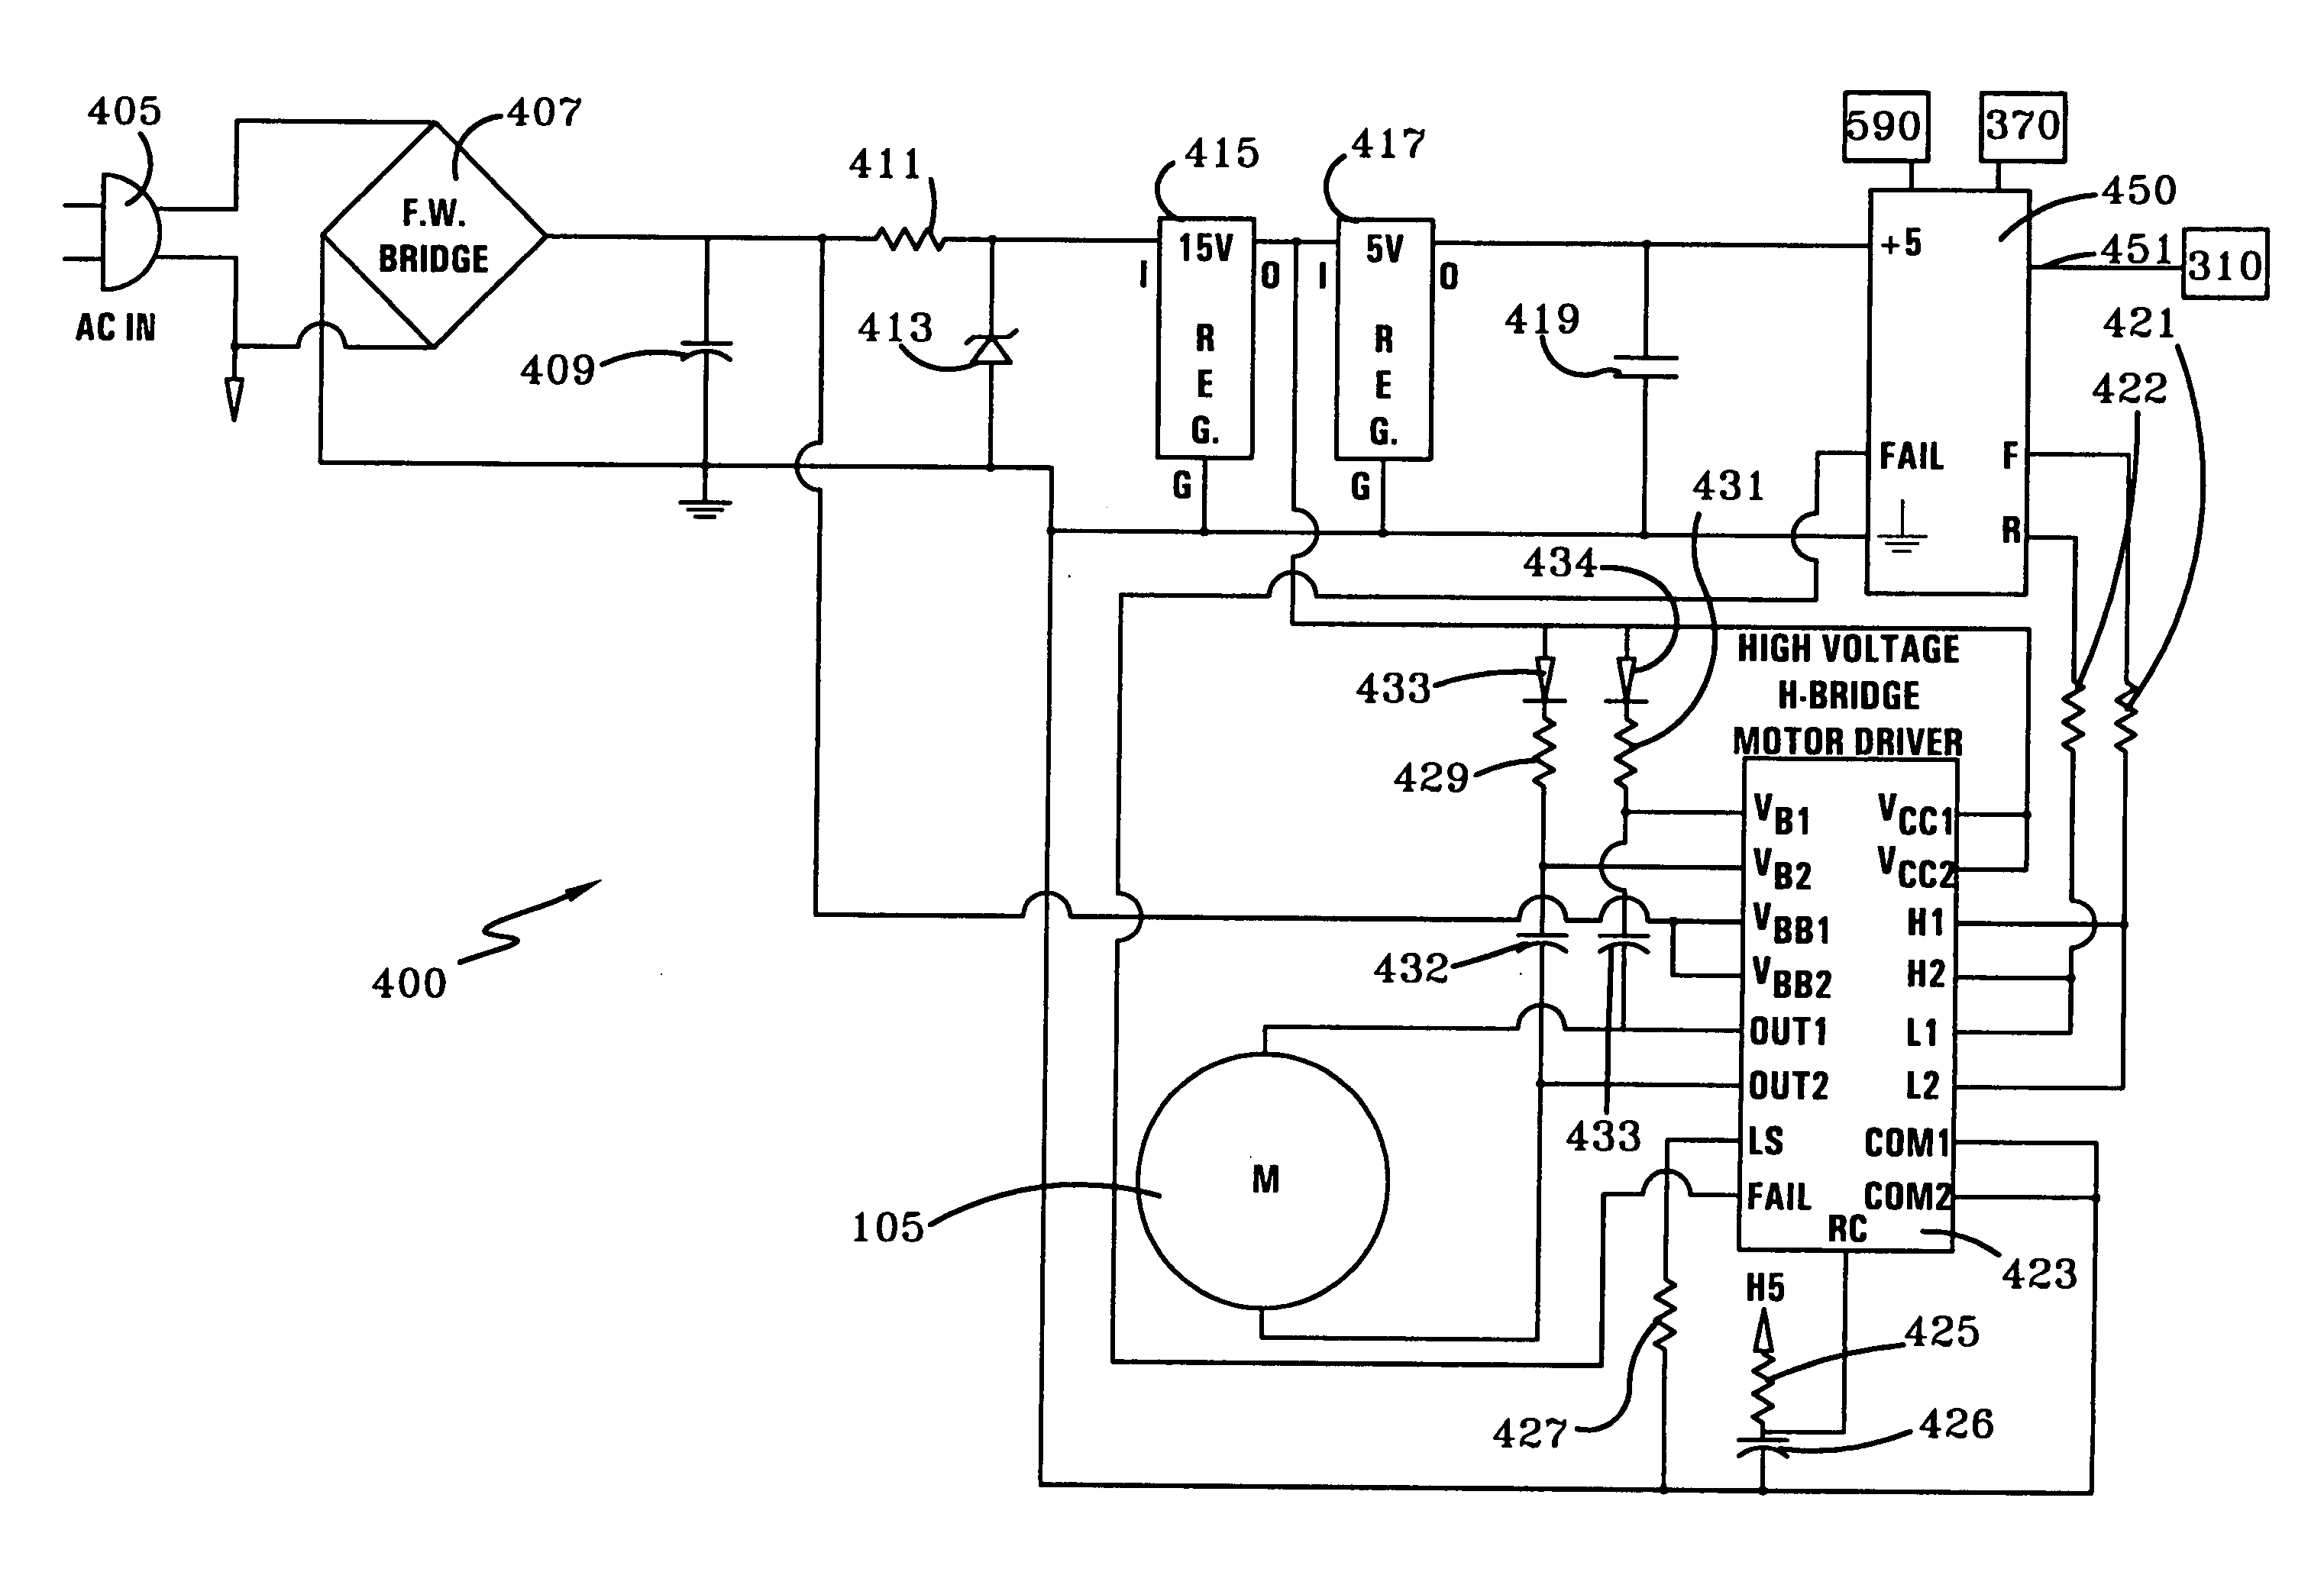 Control arrangement for a propulsion unit for a self-propelled floor care appliance